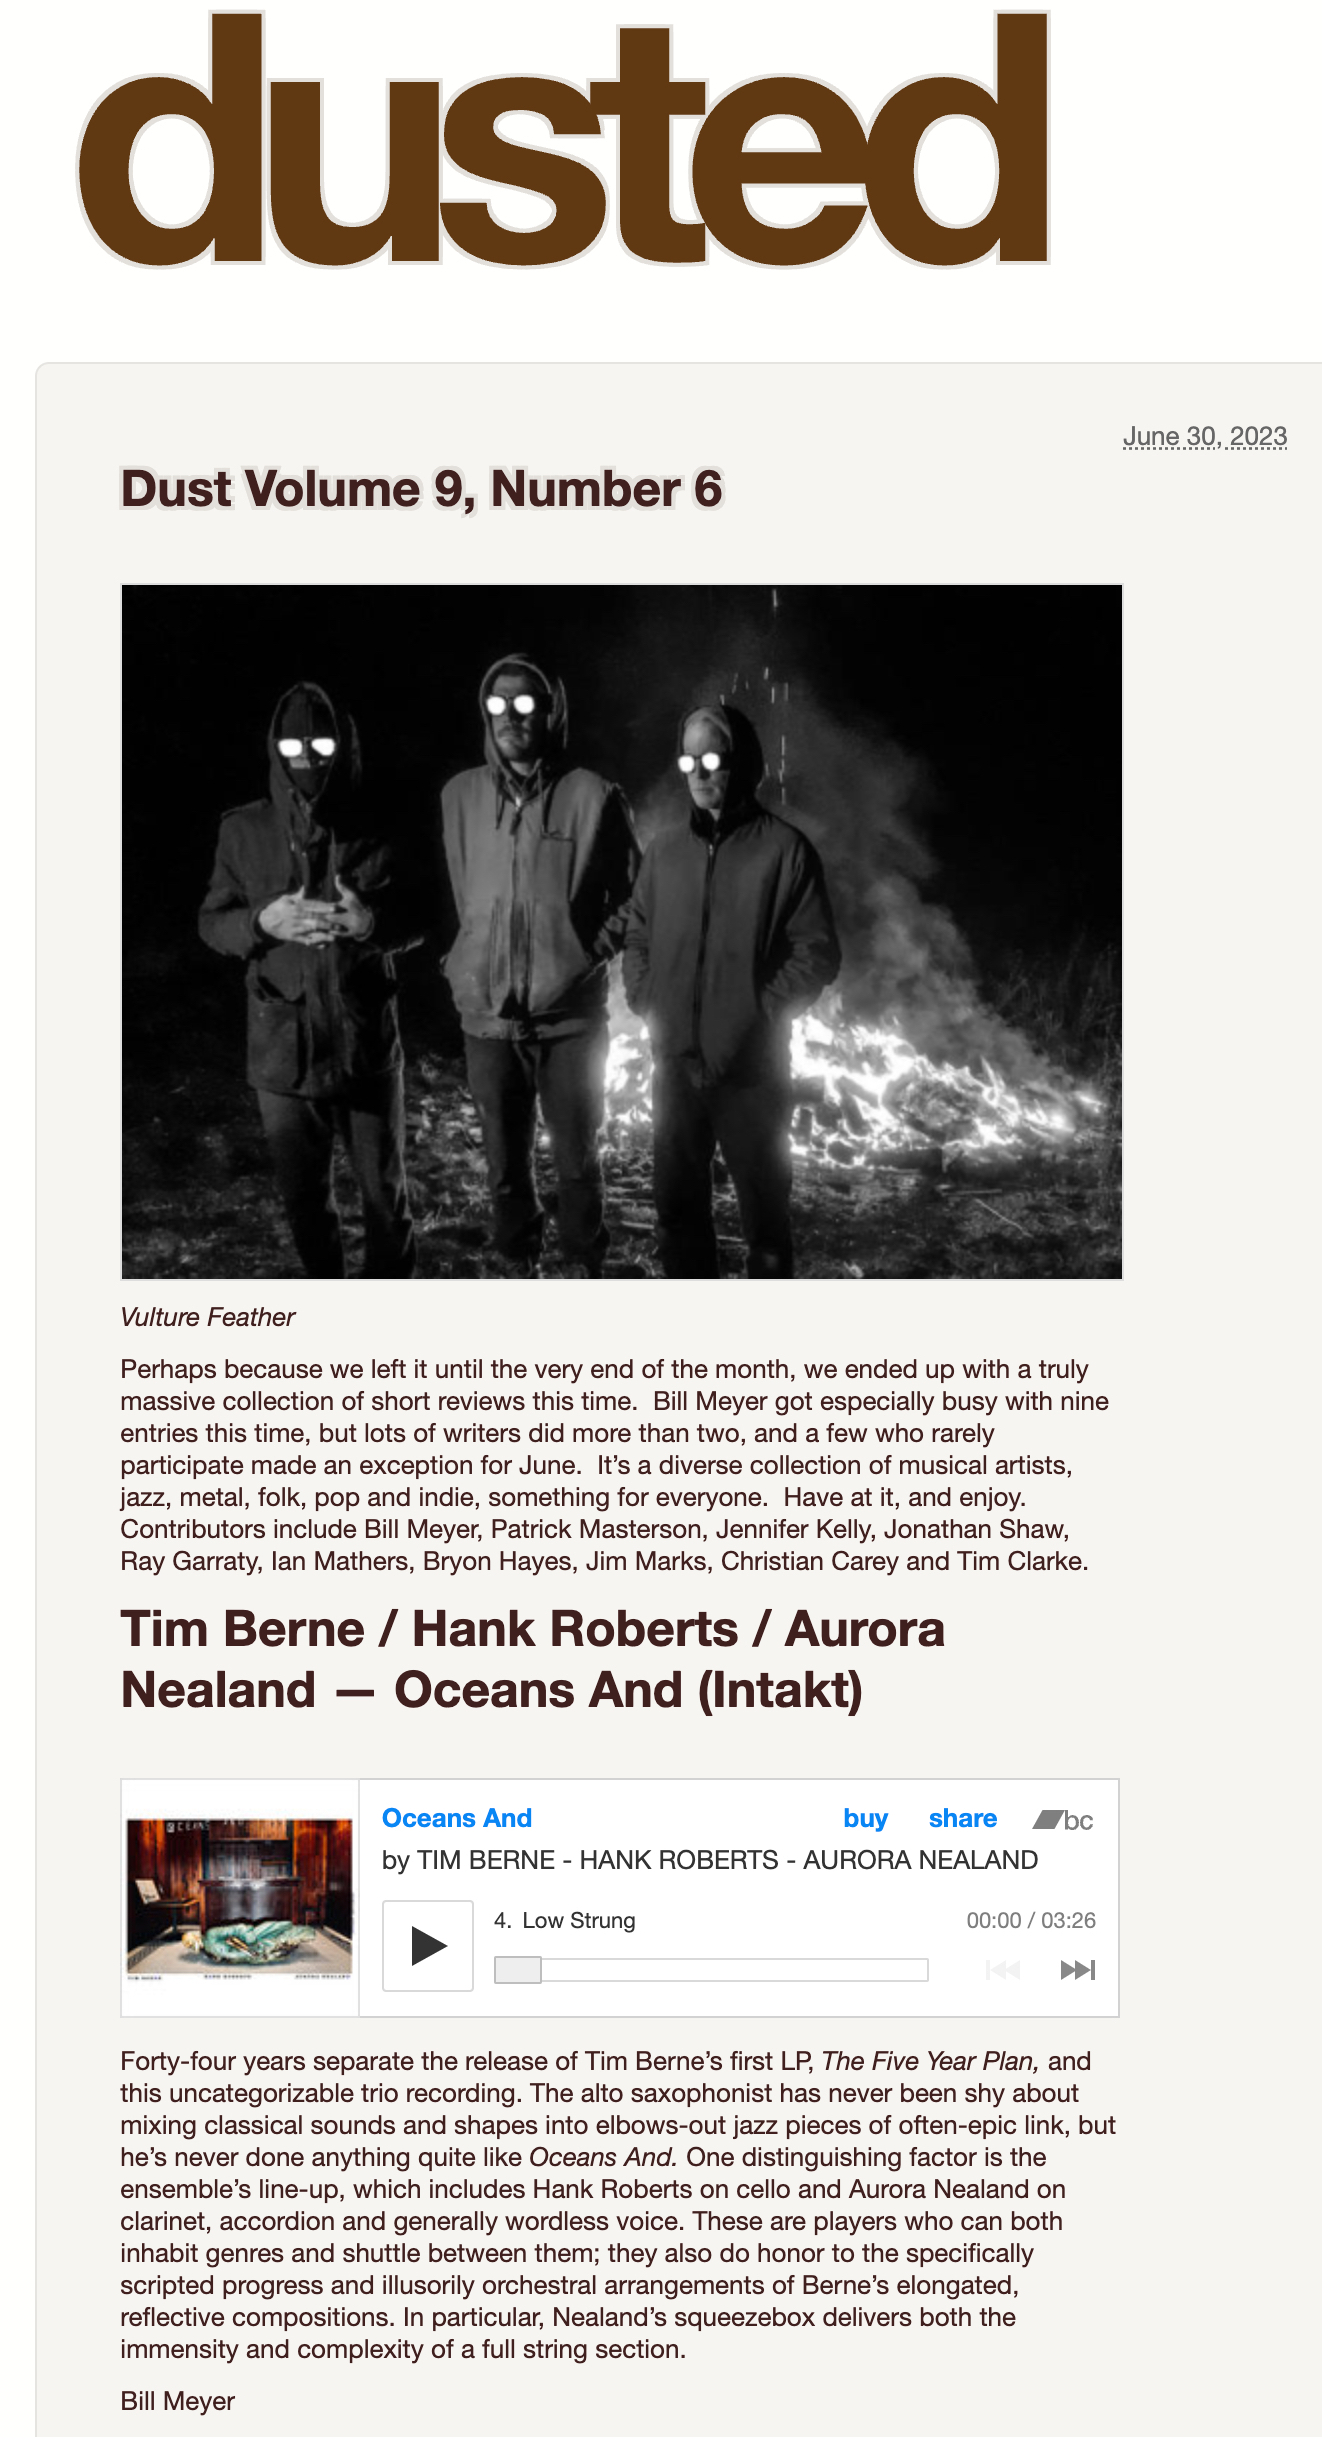 Forty-four years separate the release of Tim Berne’s first LP, The Five Year Plan, and this uncategorizable trio recording. The alto saxophonist has never been shy about mixing classical sounds and shapes into elbows-out jazz pieces of often-epic link, but he’s never done anything quite like Oceans And.